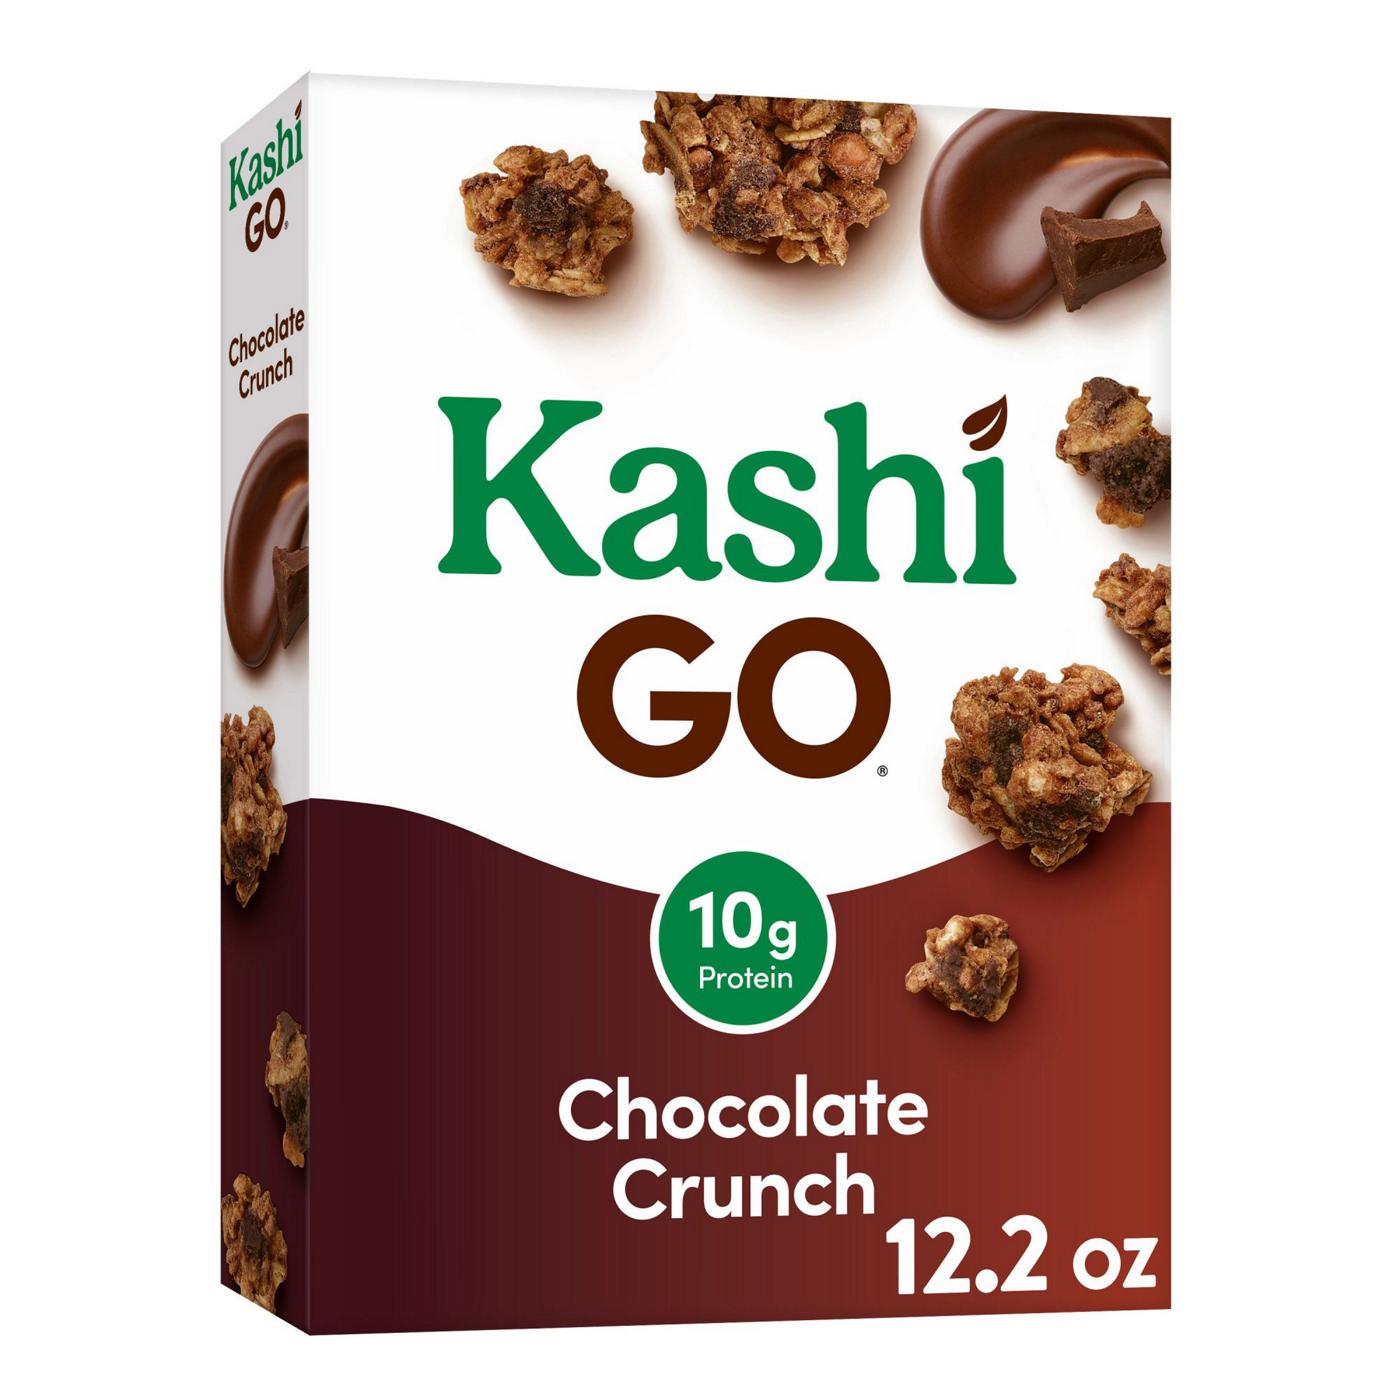 Kashi GO Chocolate Crunch Cereal; image 5 of 6